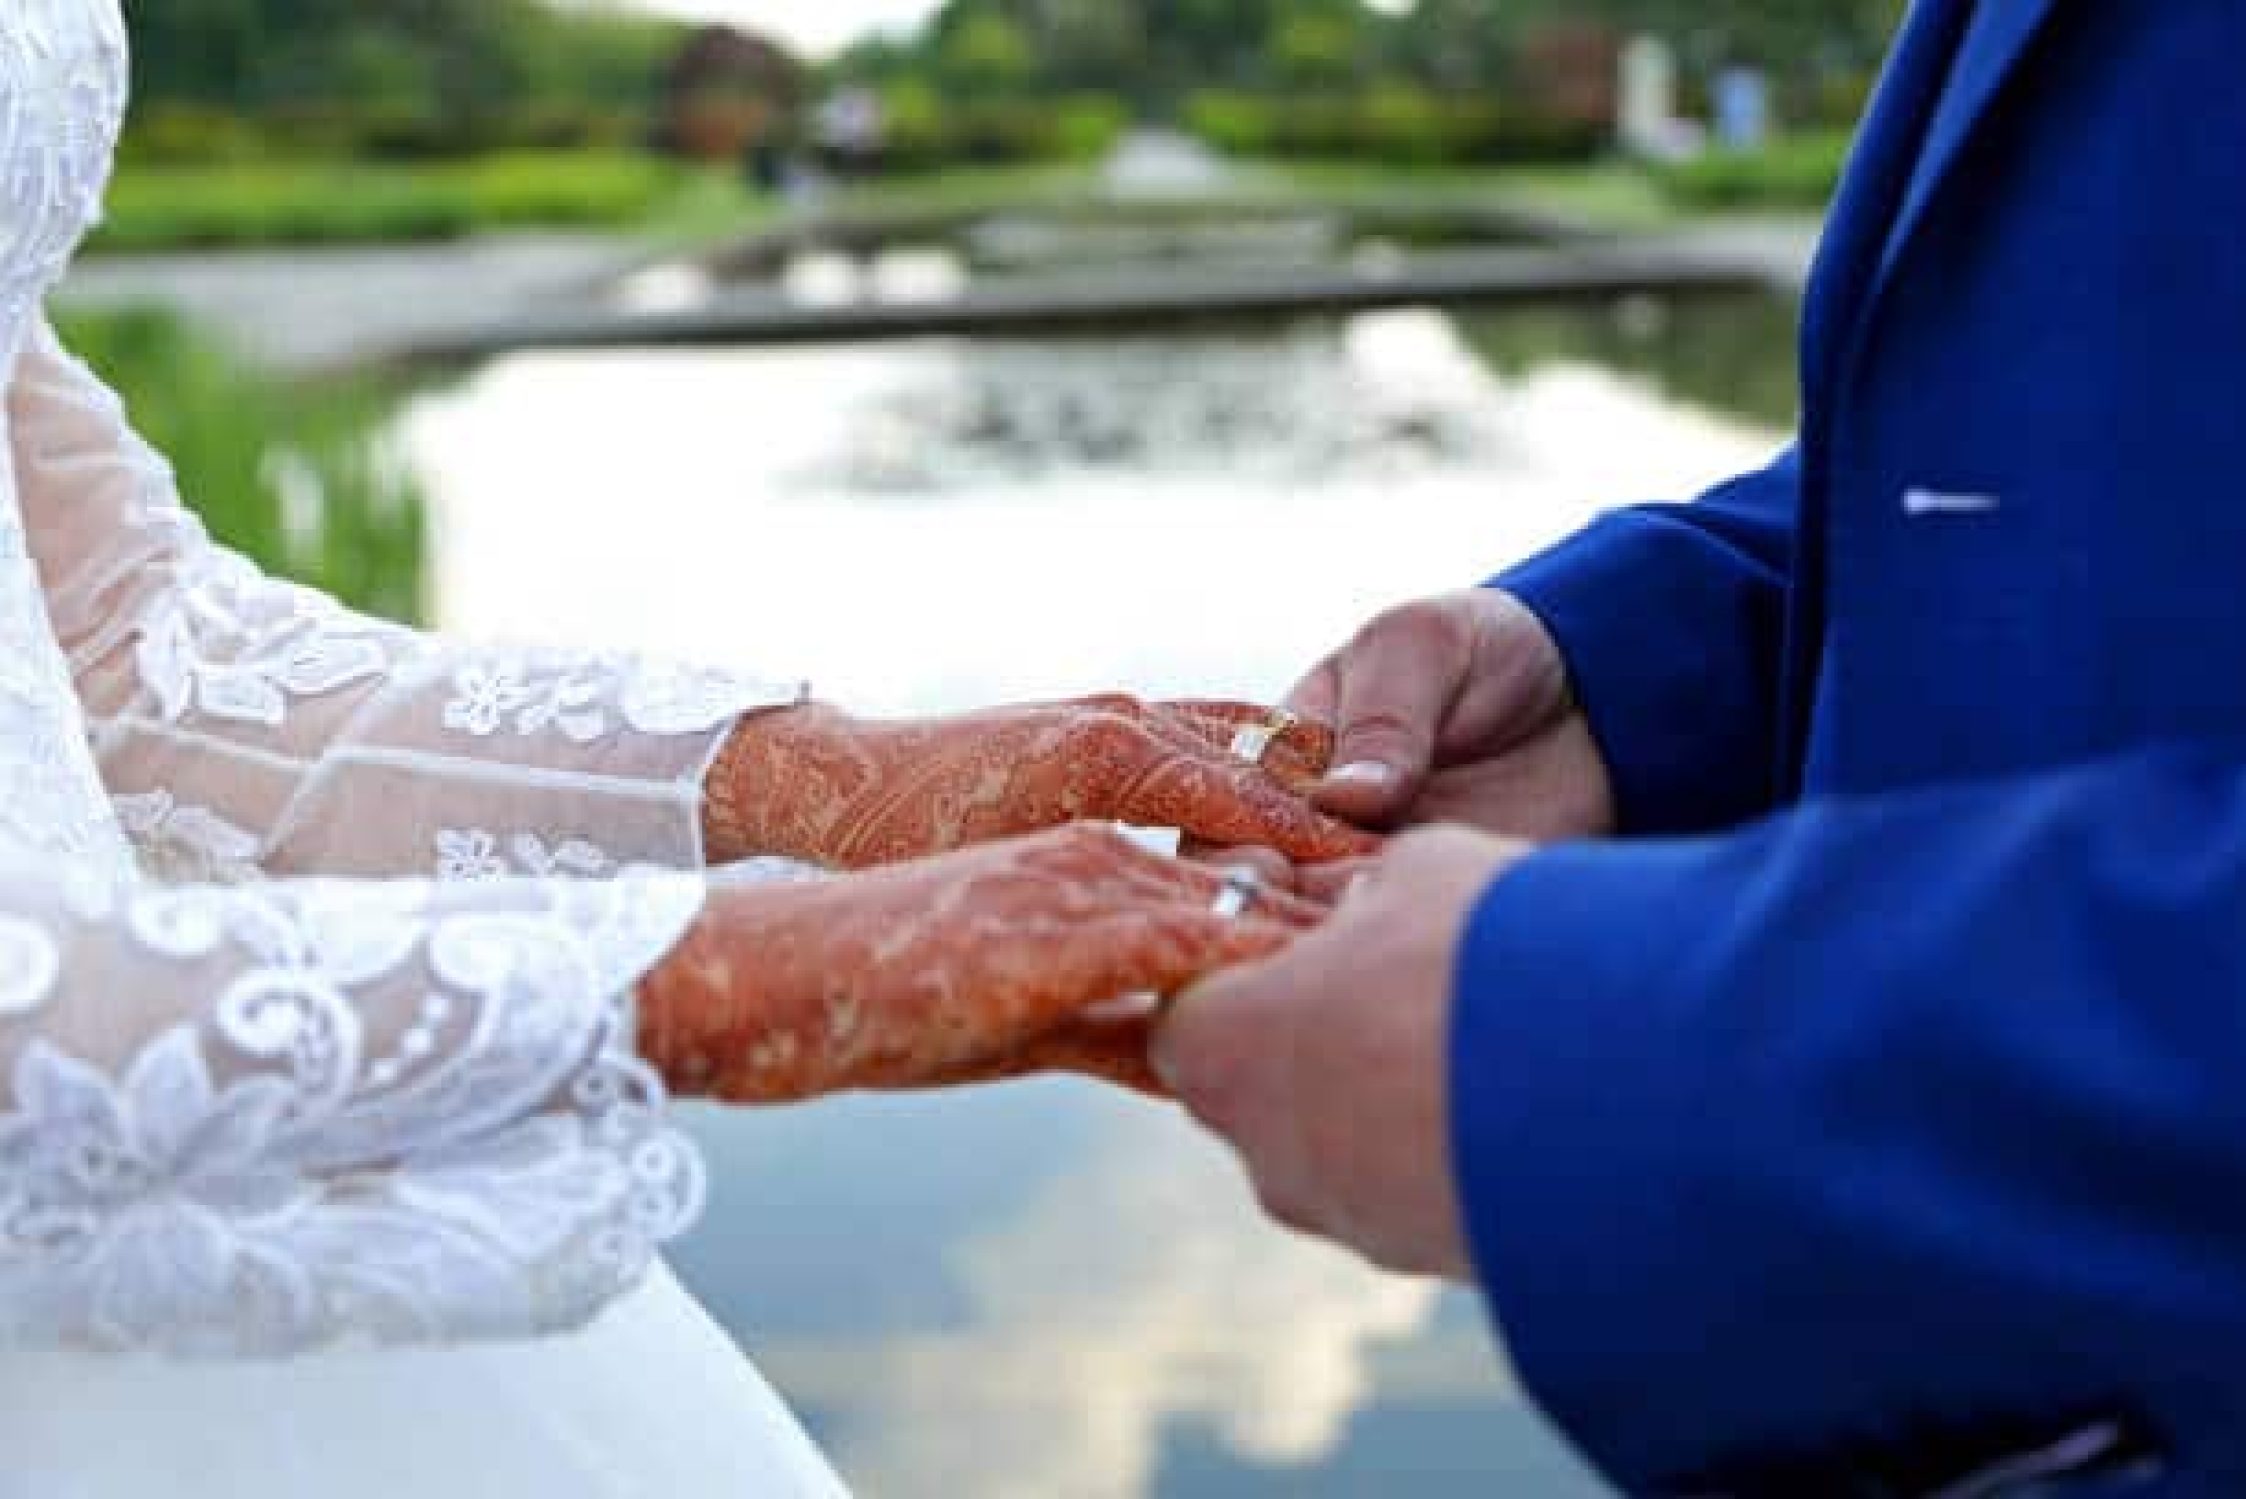 A groom holds the bride's hand. The bride's hand is decorated with henna tattoos.